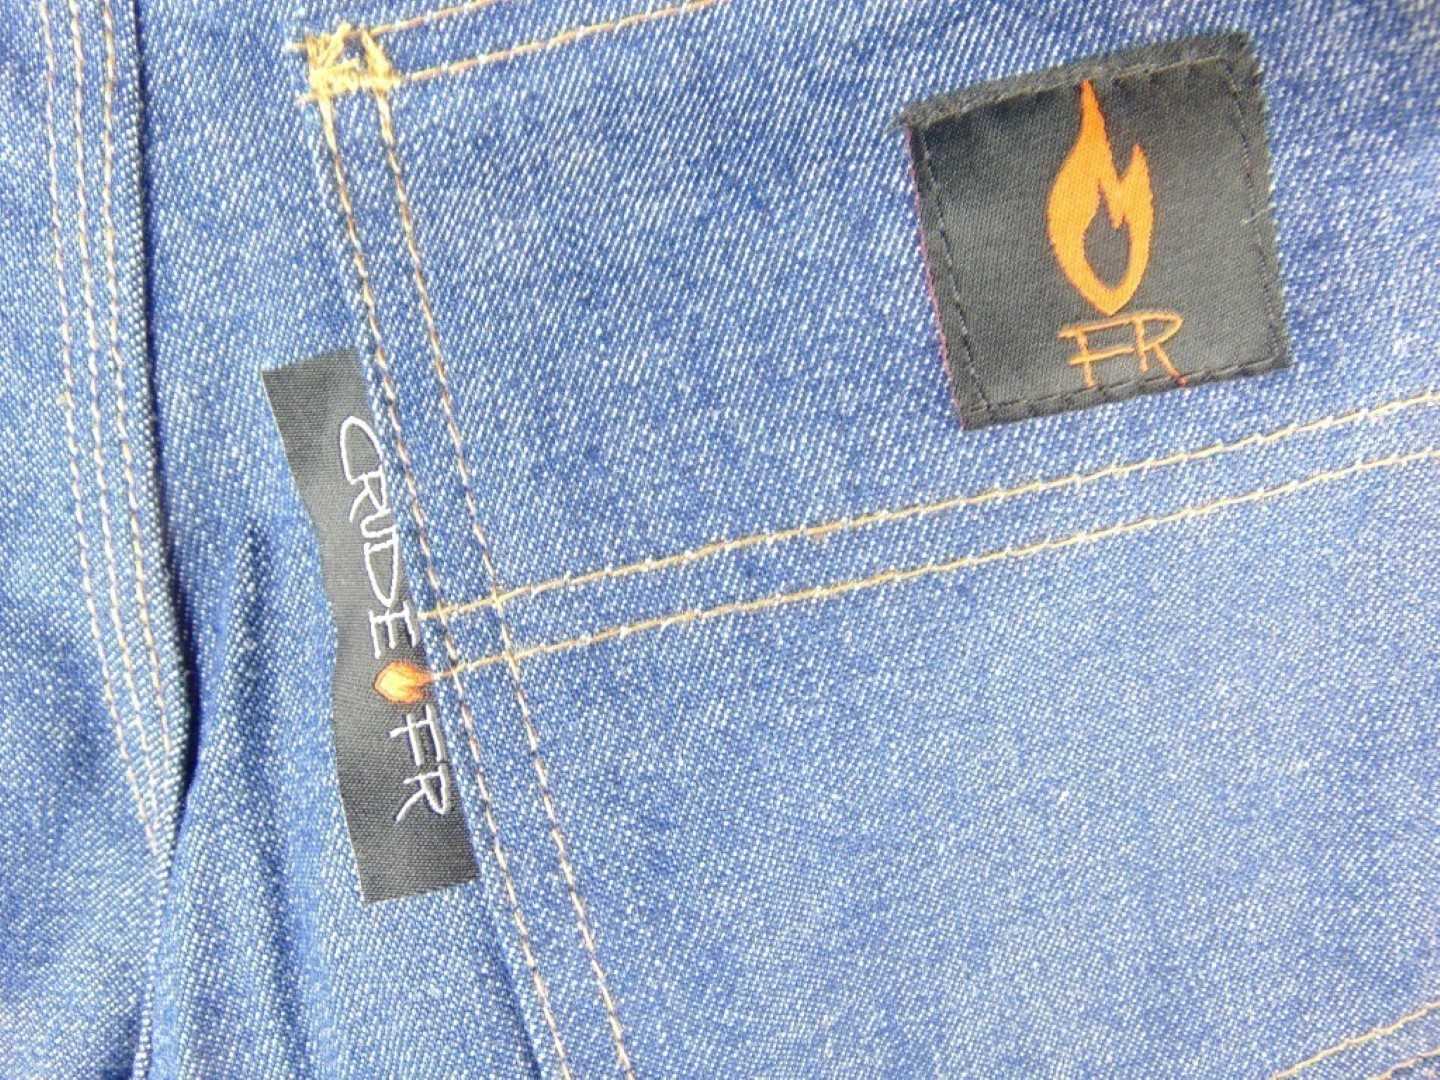 44 X 30 CRUDE FR / Flame Resistant Jeans (Unfinished Seam)